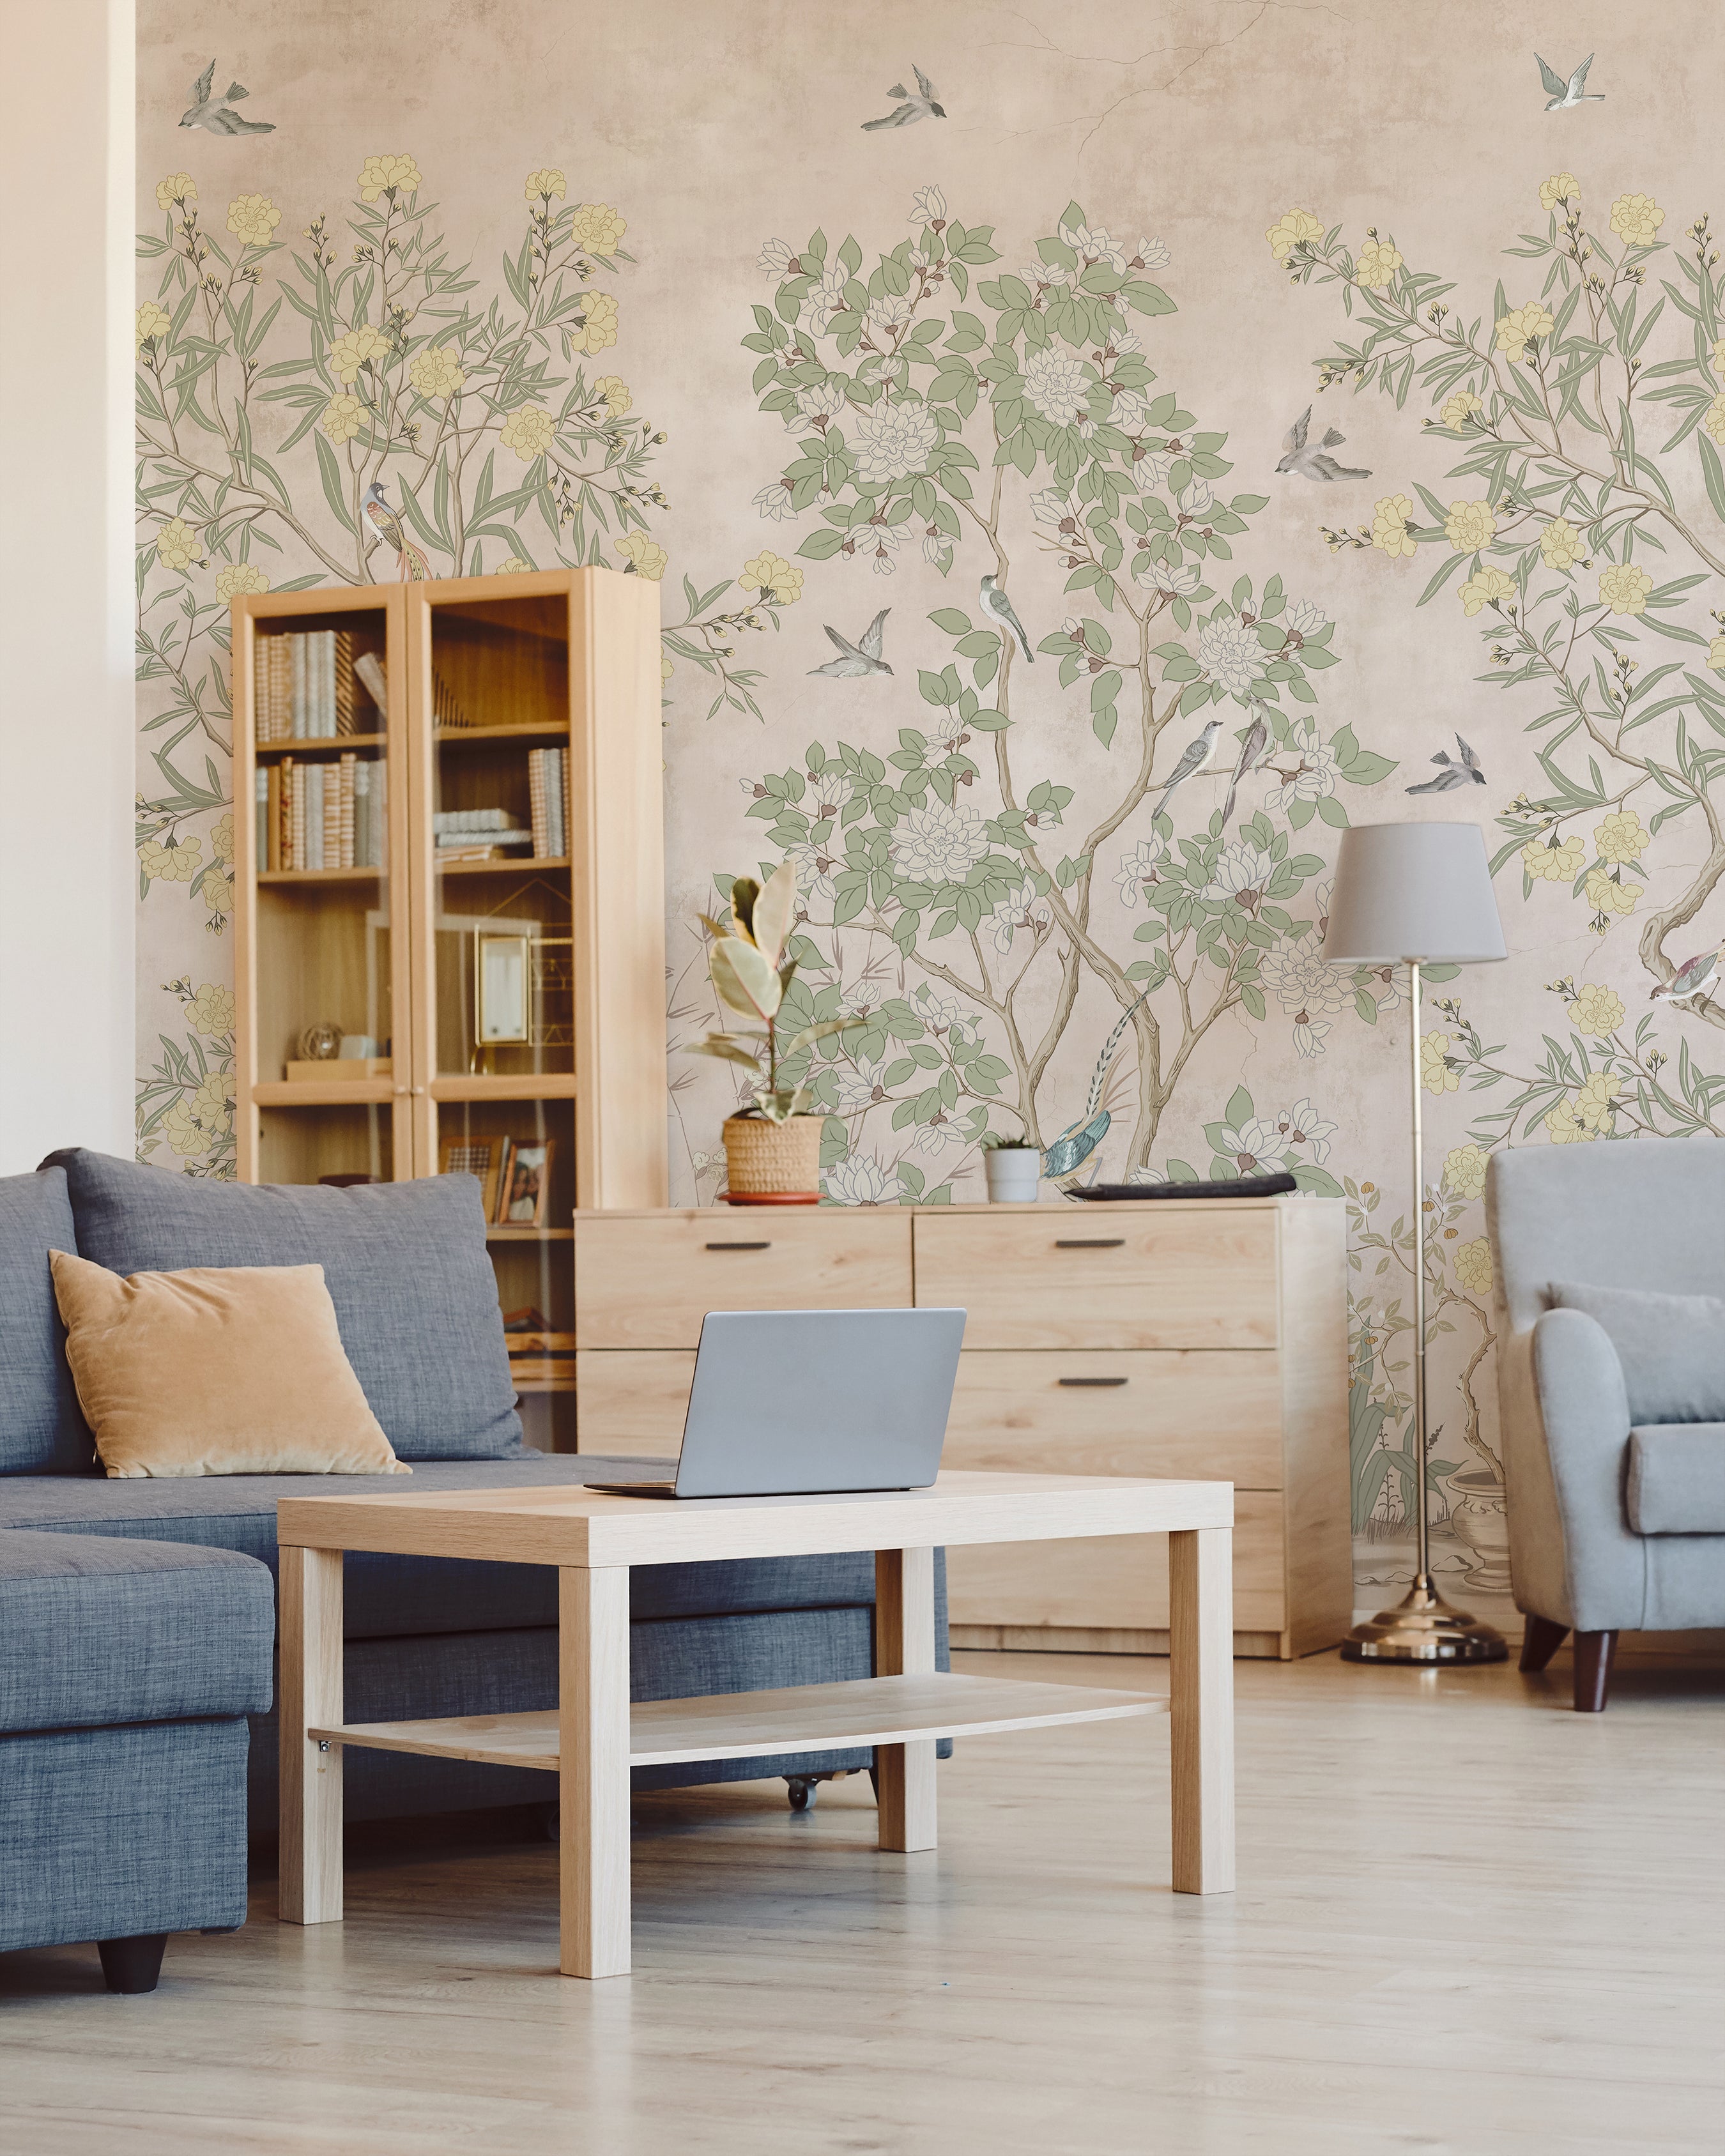 Image of a cozy home office area with chinoiserie wallpaper featuring a delicate tree and bird design that adds a peaceful and artistic backdrop to the room furnished with a light wood desk, shelving, and blue textiles